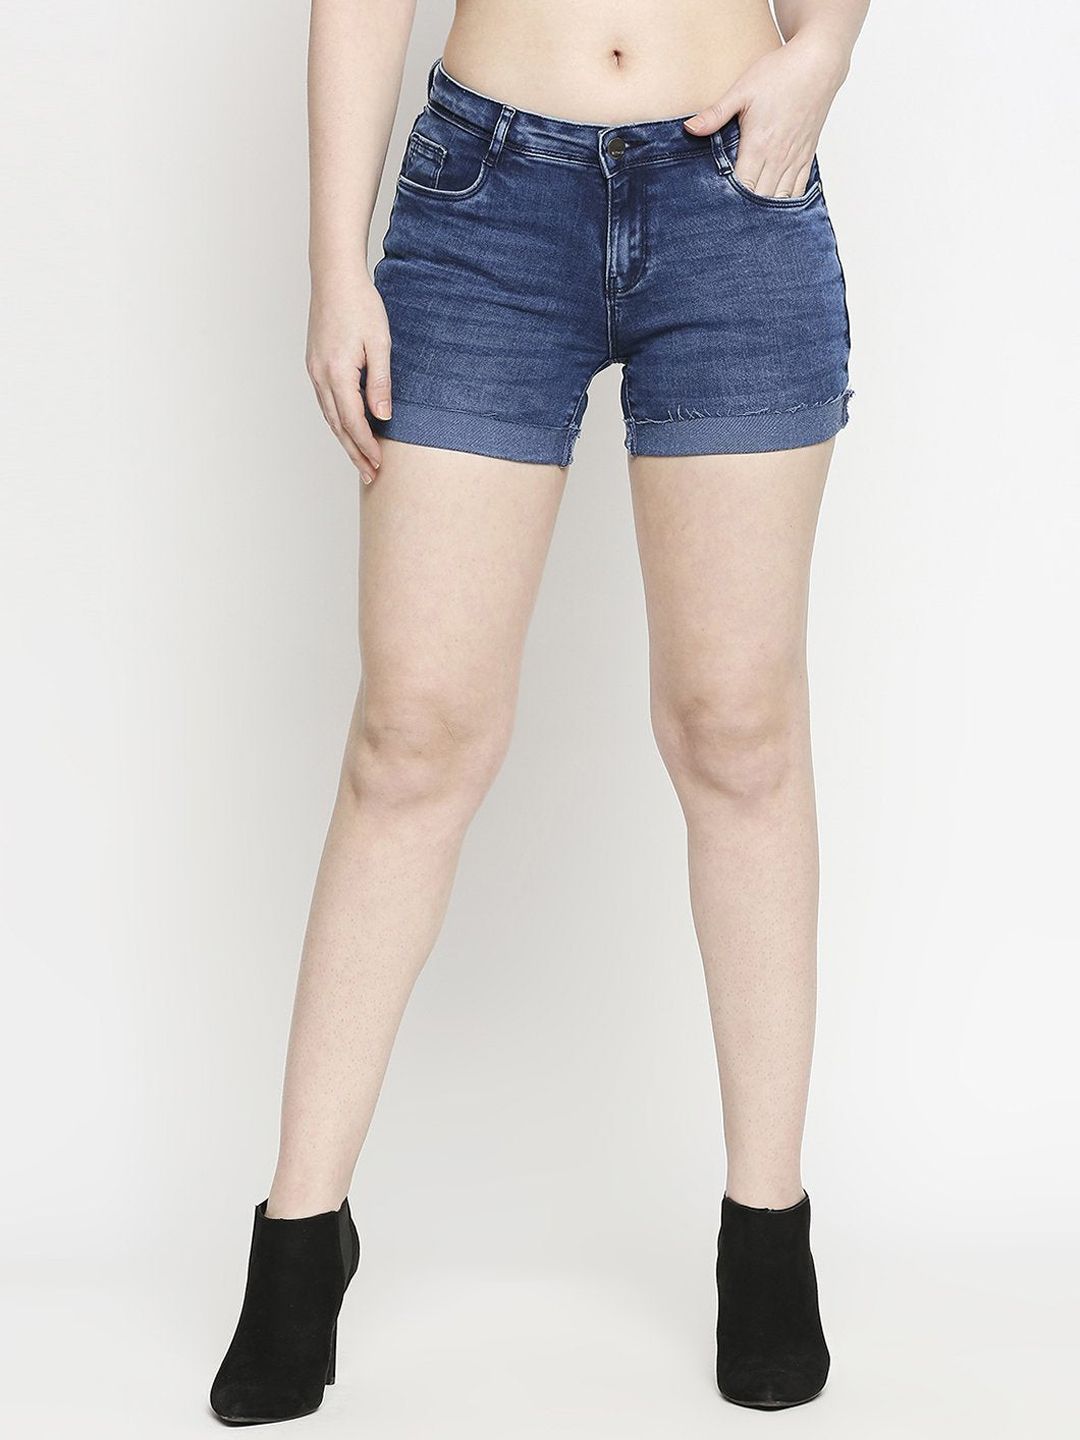 Kraus Jeans Women Blue Washed Washed Slim Fit High-Rise Cotton Denim Shorts Price in India